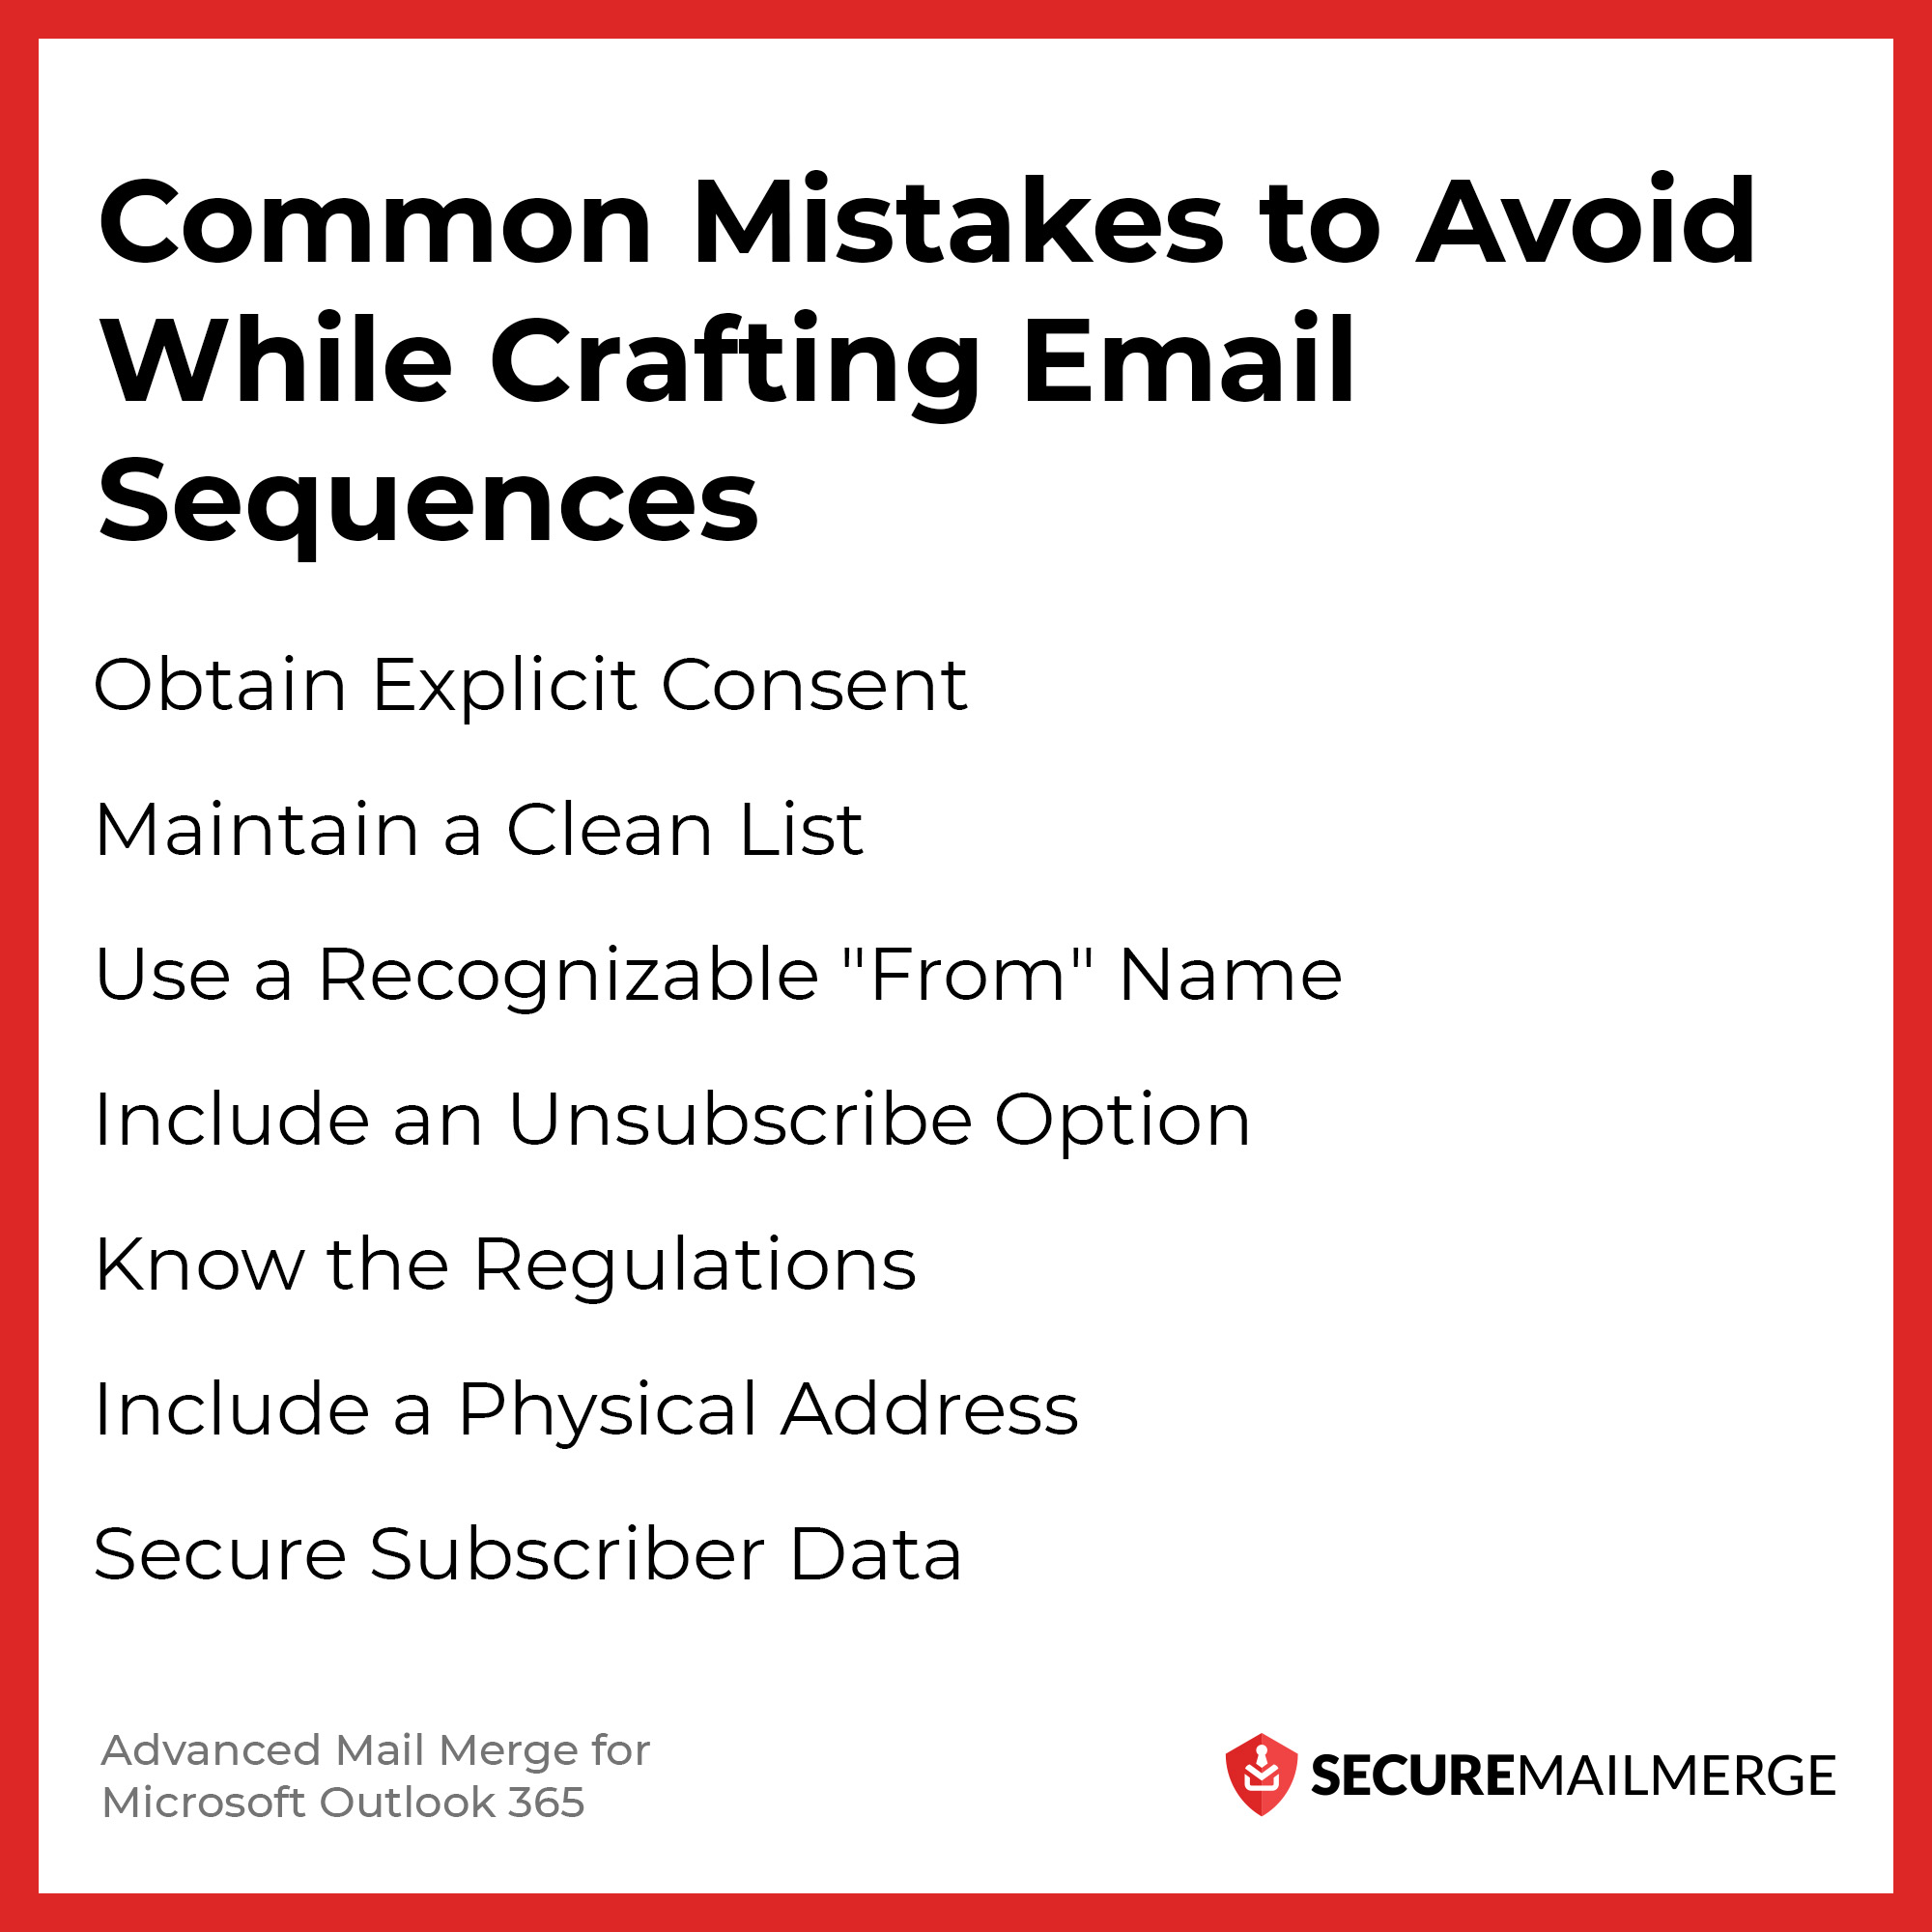 Common Mistakes to Avoid While Crafting Email Sequences